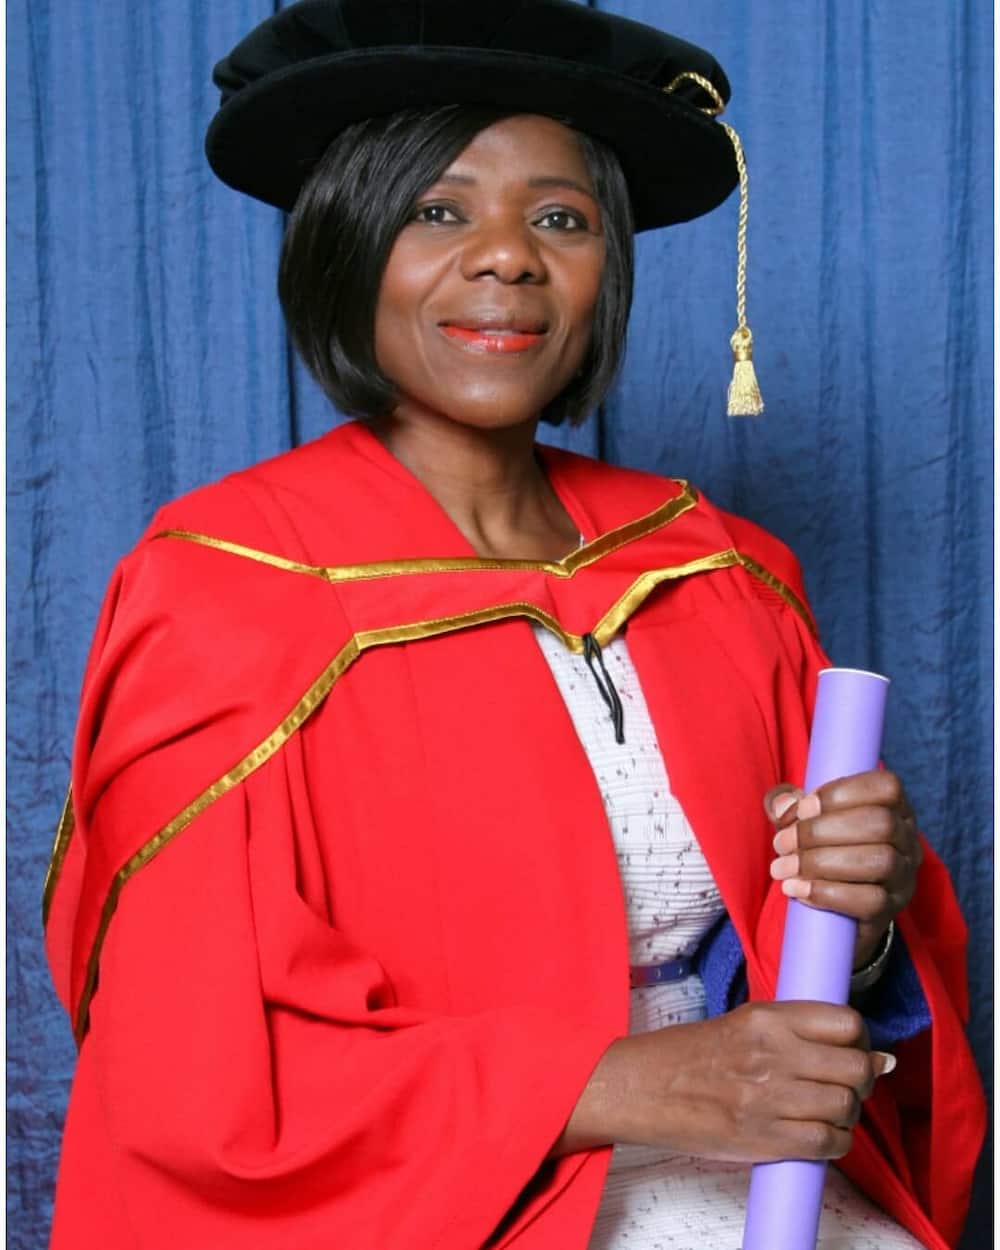 thuli madonsela biography: age, children, husband, wedding, education, qualifications, books, awards, quotes and contact details